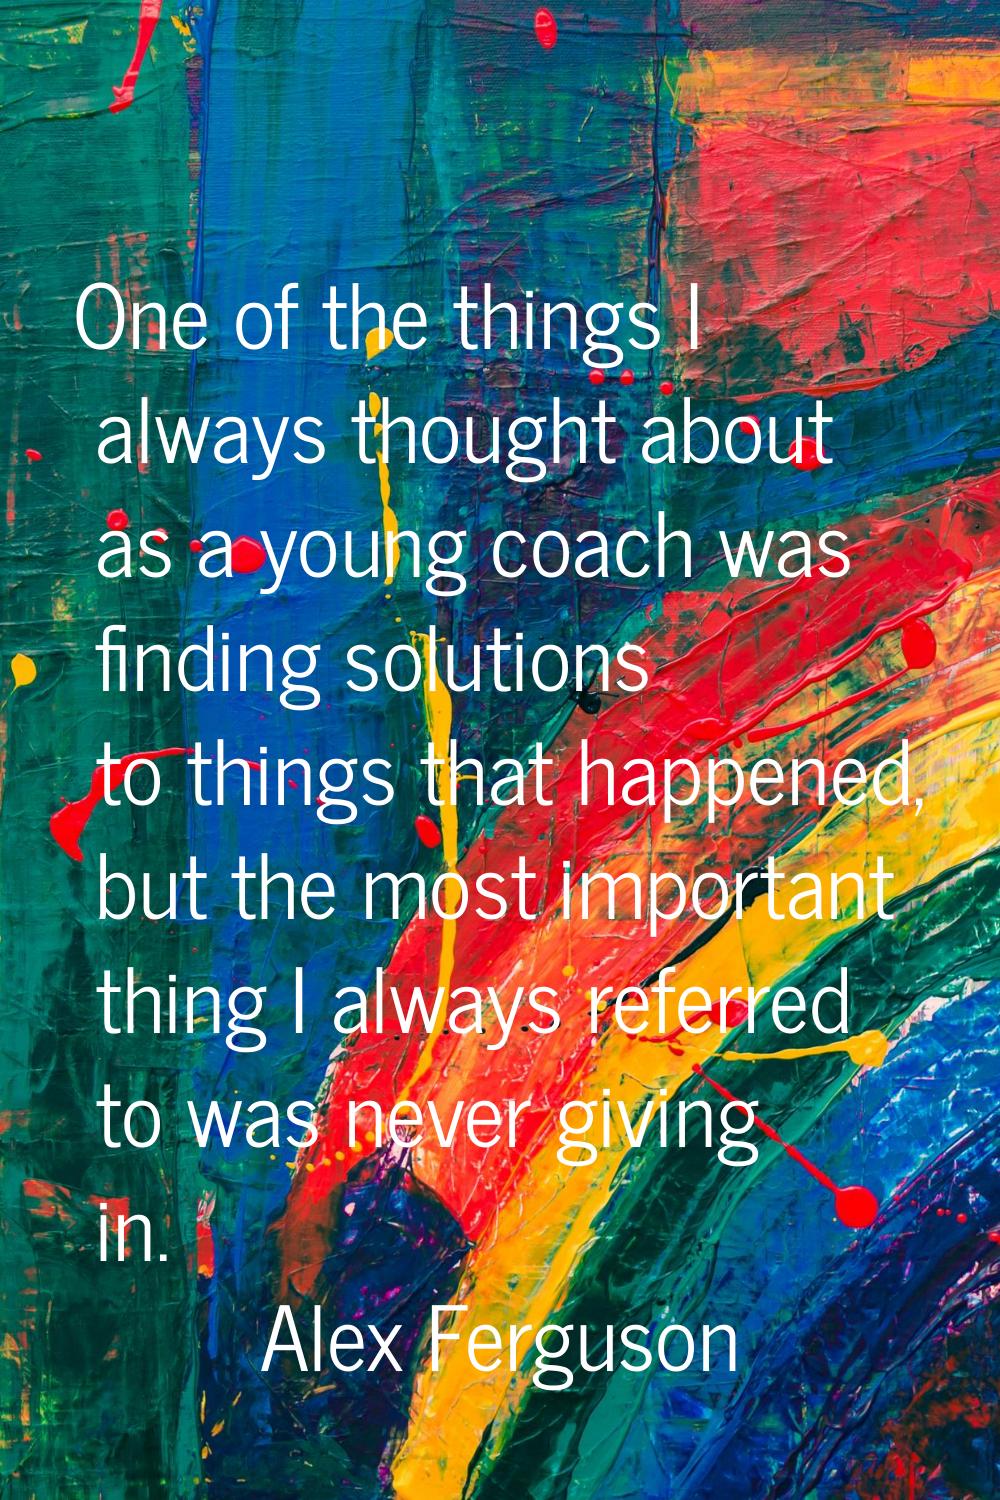 One of the things I always thought about as a young coach was finding solutions to things that happ